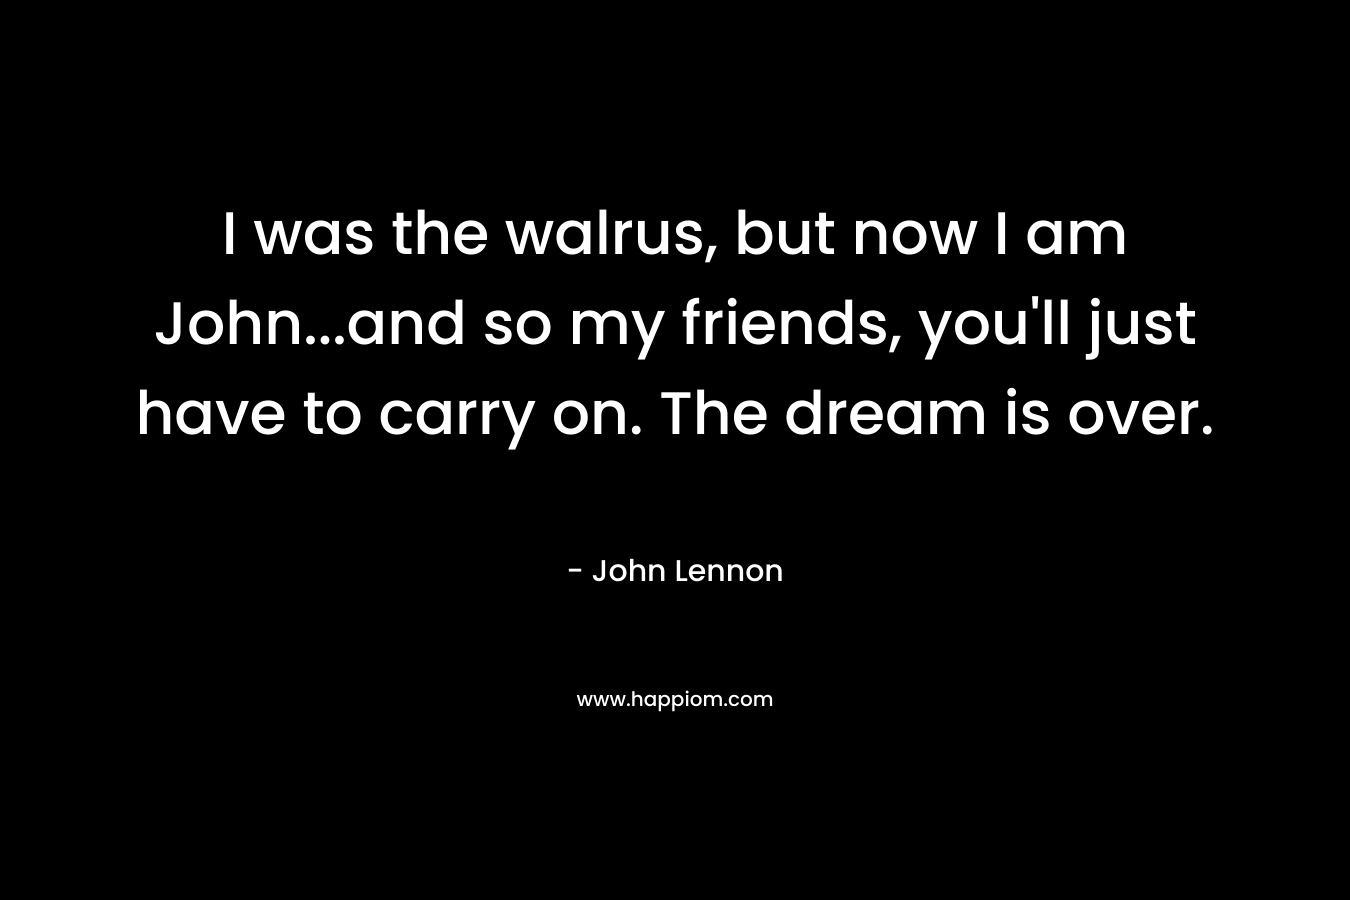 I was the walrus, but now I am John…and so my friends, you’ll just have to carry on. The dream is over. – John Lennon